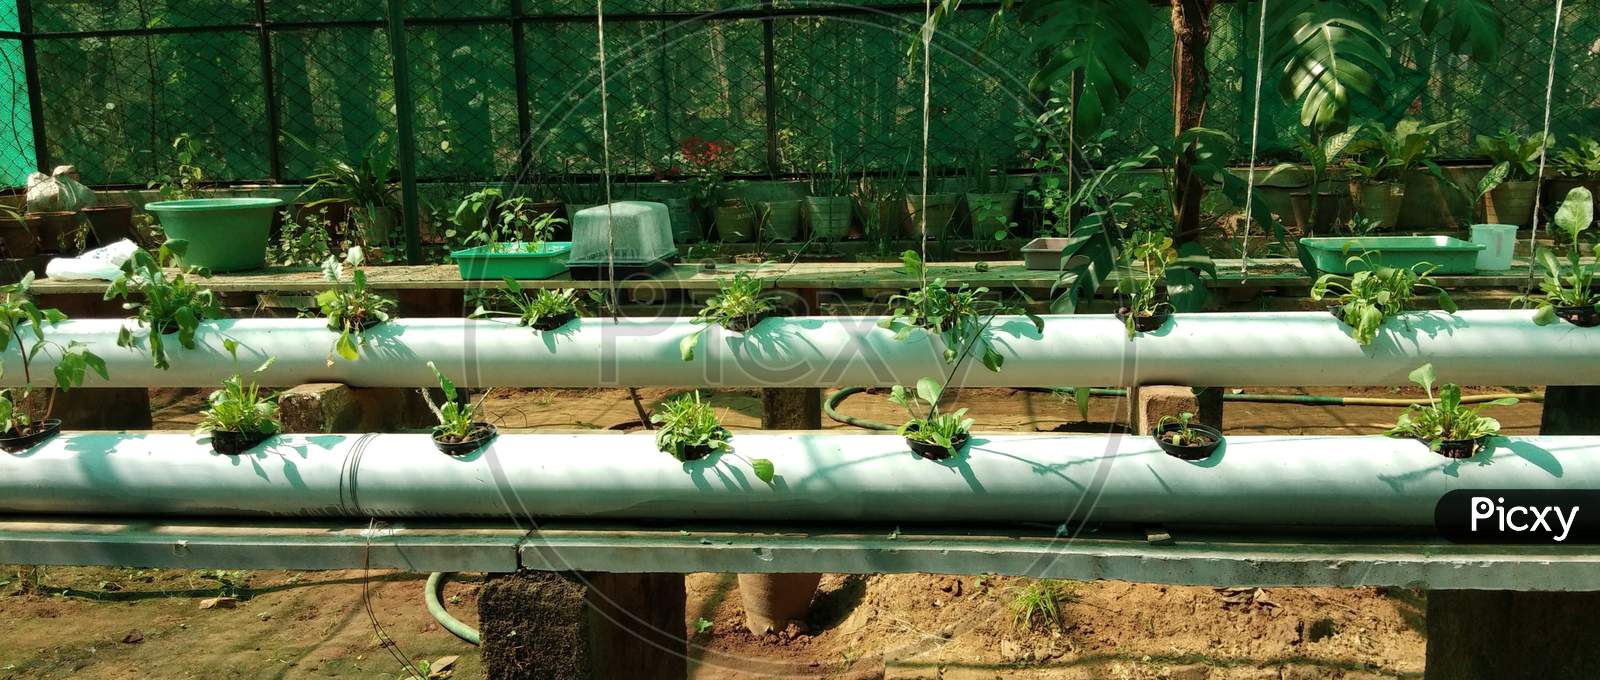 Plant's will be grown in pipe